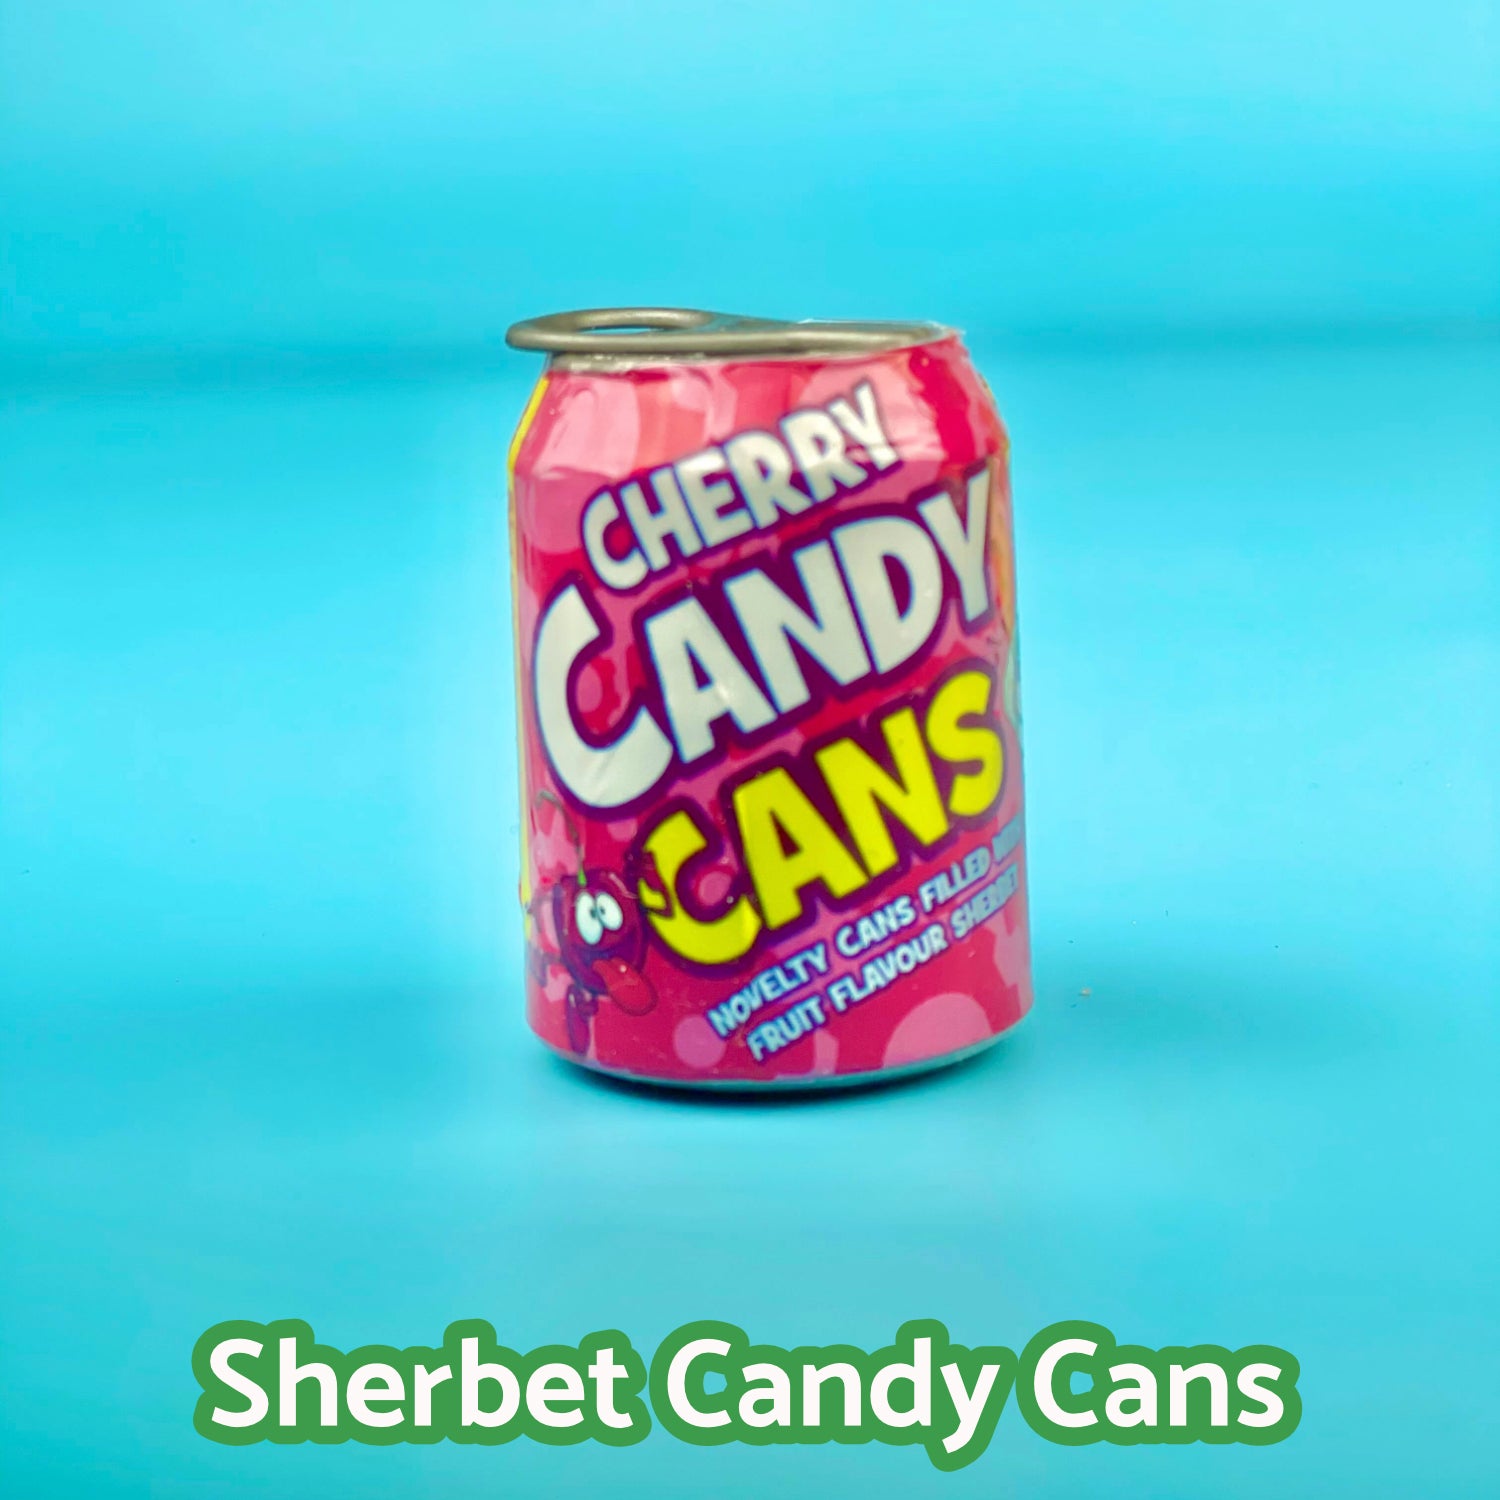 Sherbet Candy Cans